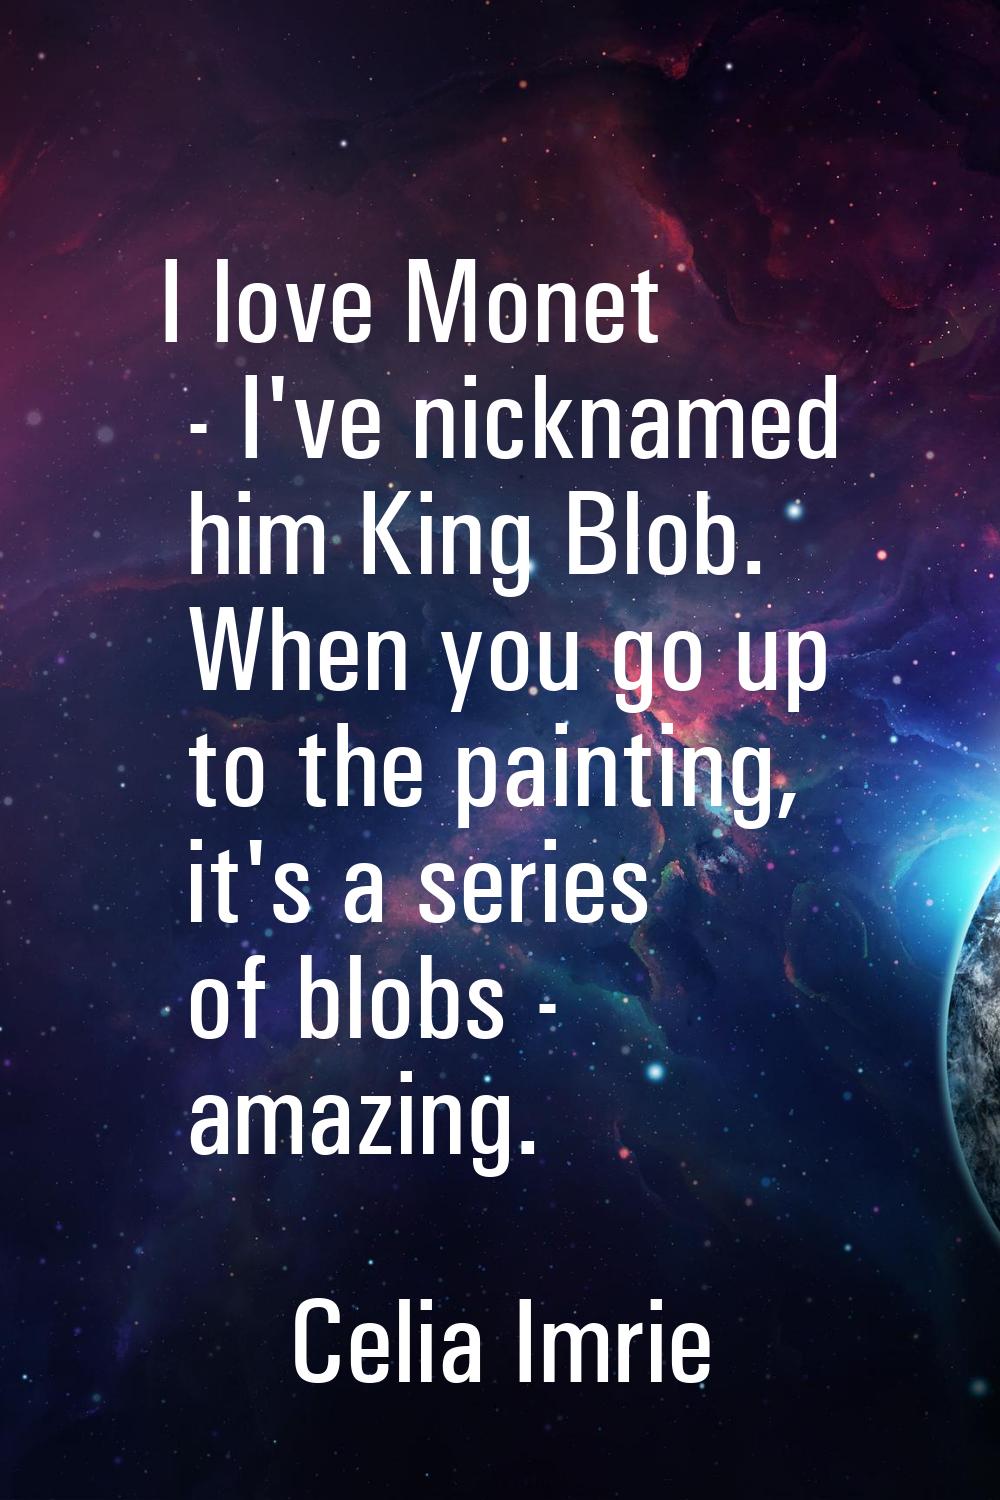 I love Monet - I've nicknamed him King Blob. When you go up to the painting, it's a series of blobs